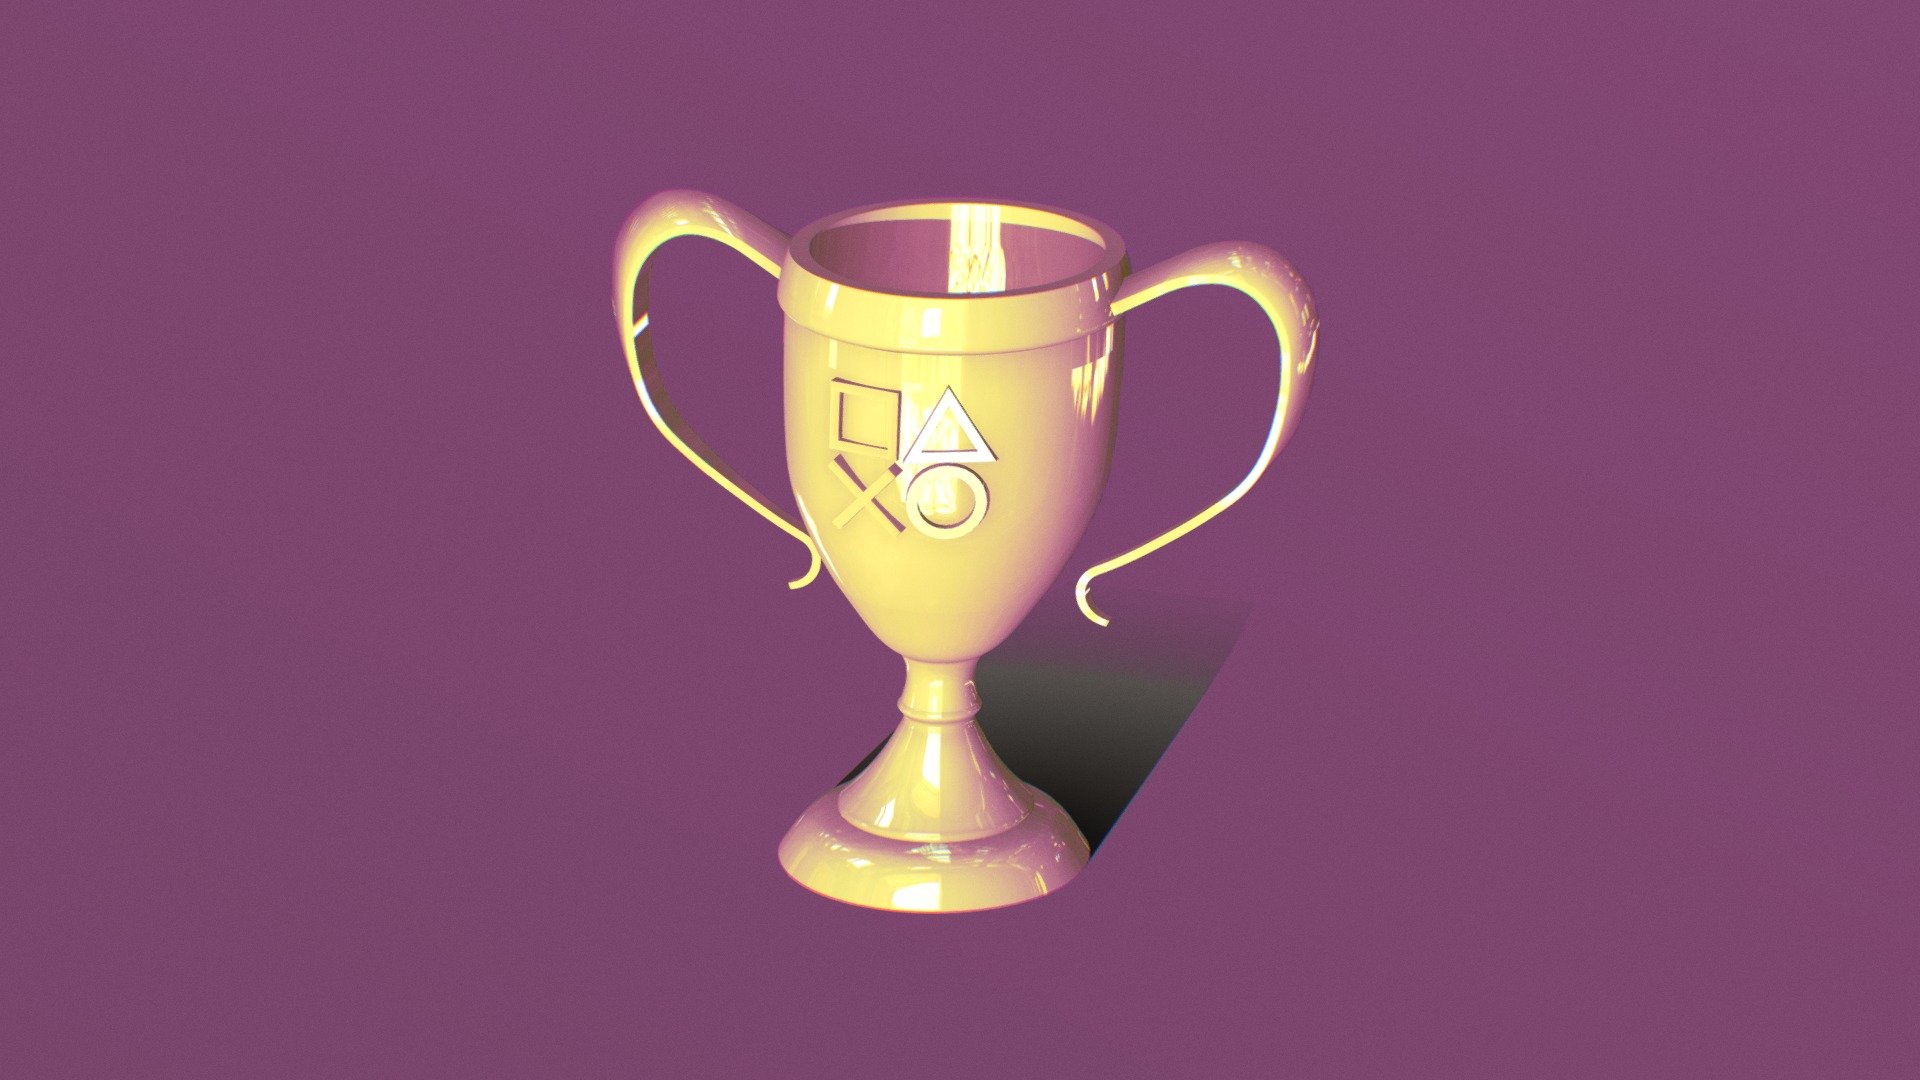 But Wrong - Psn Trophy - 3D model by Bianca Pinto (@biartss) 3d model